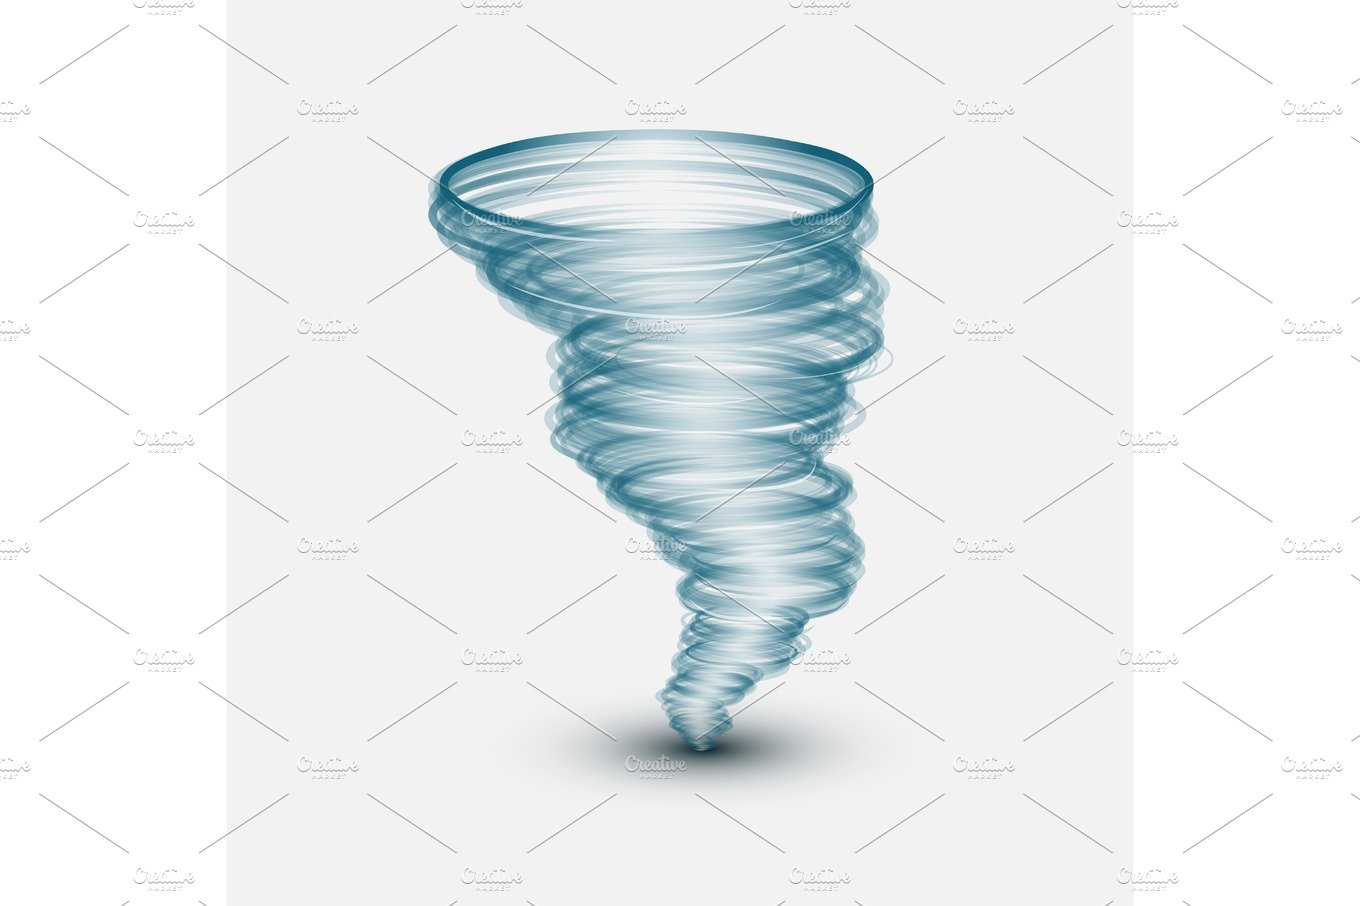 Abstract tornado on isolated background cover image.